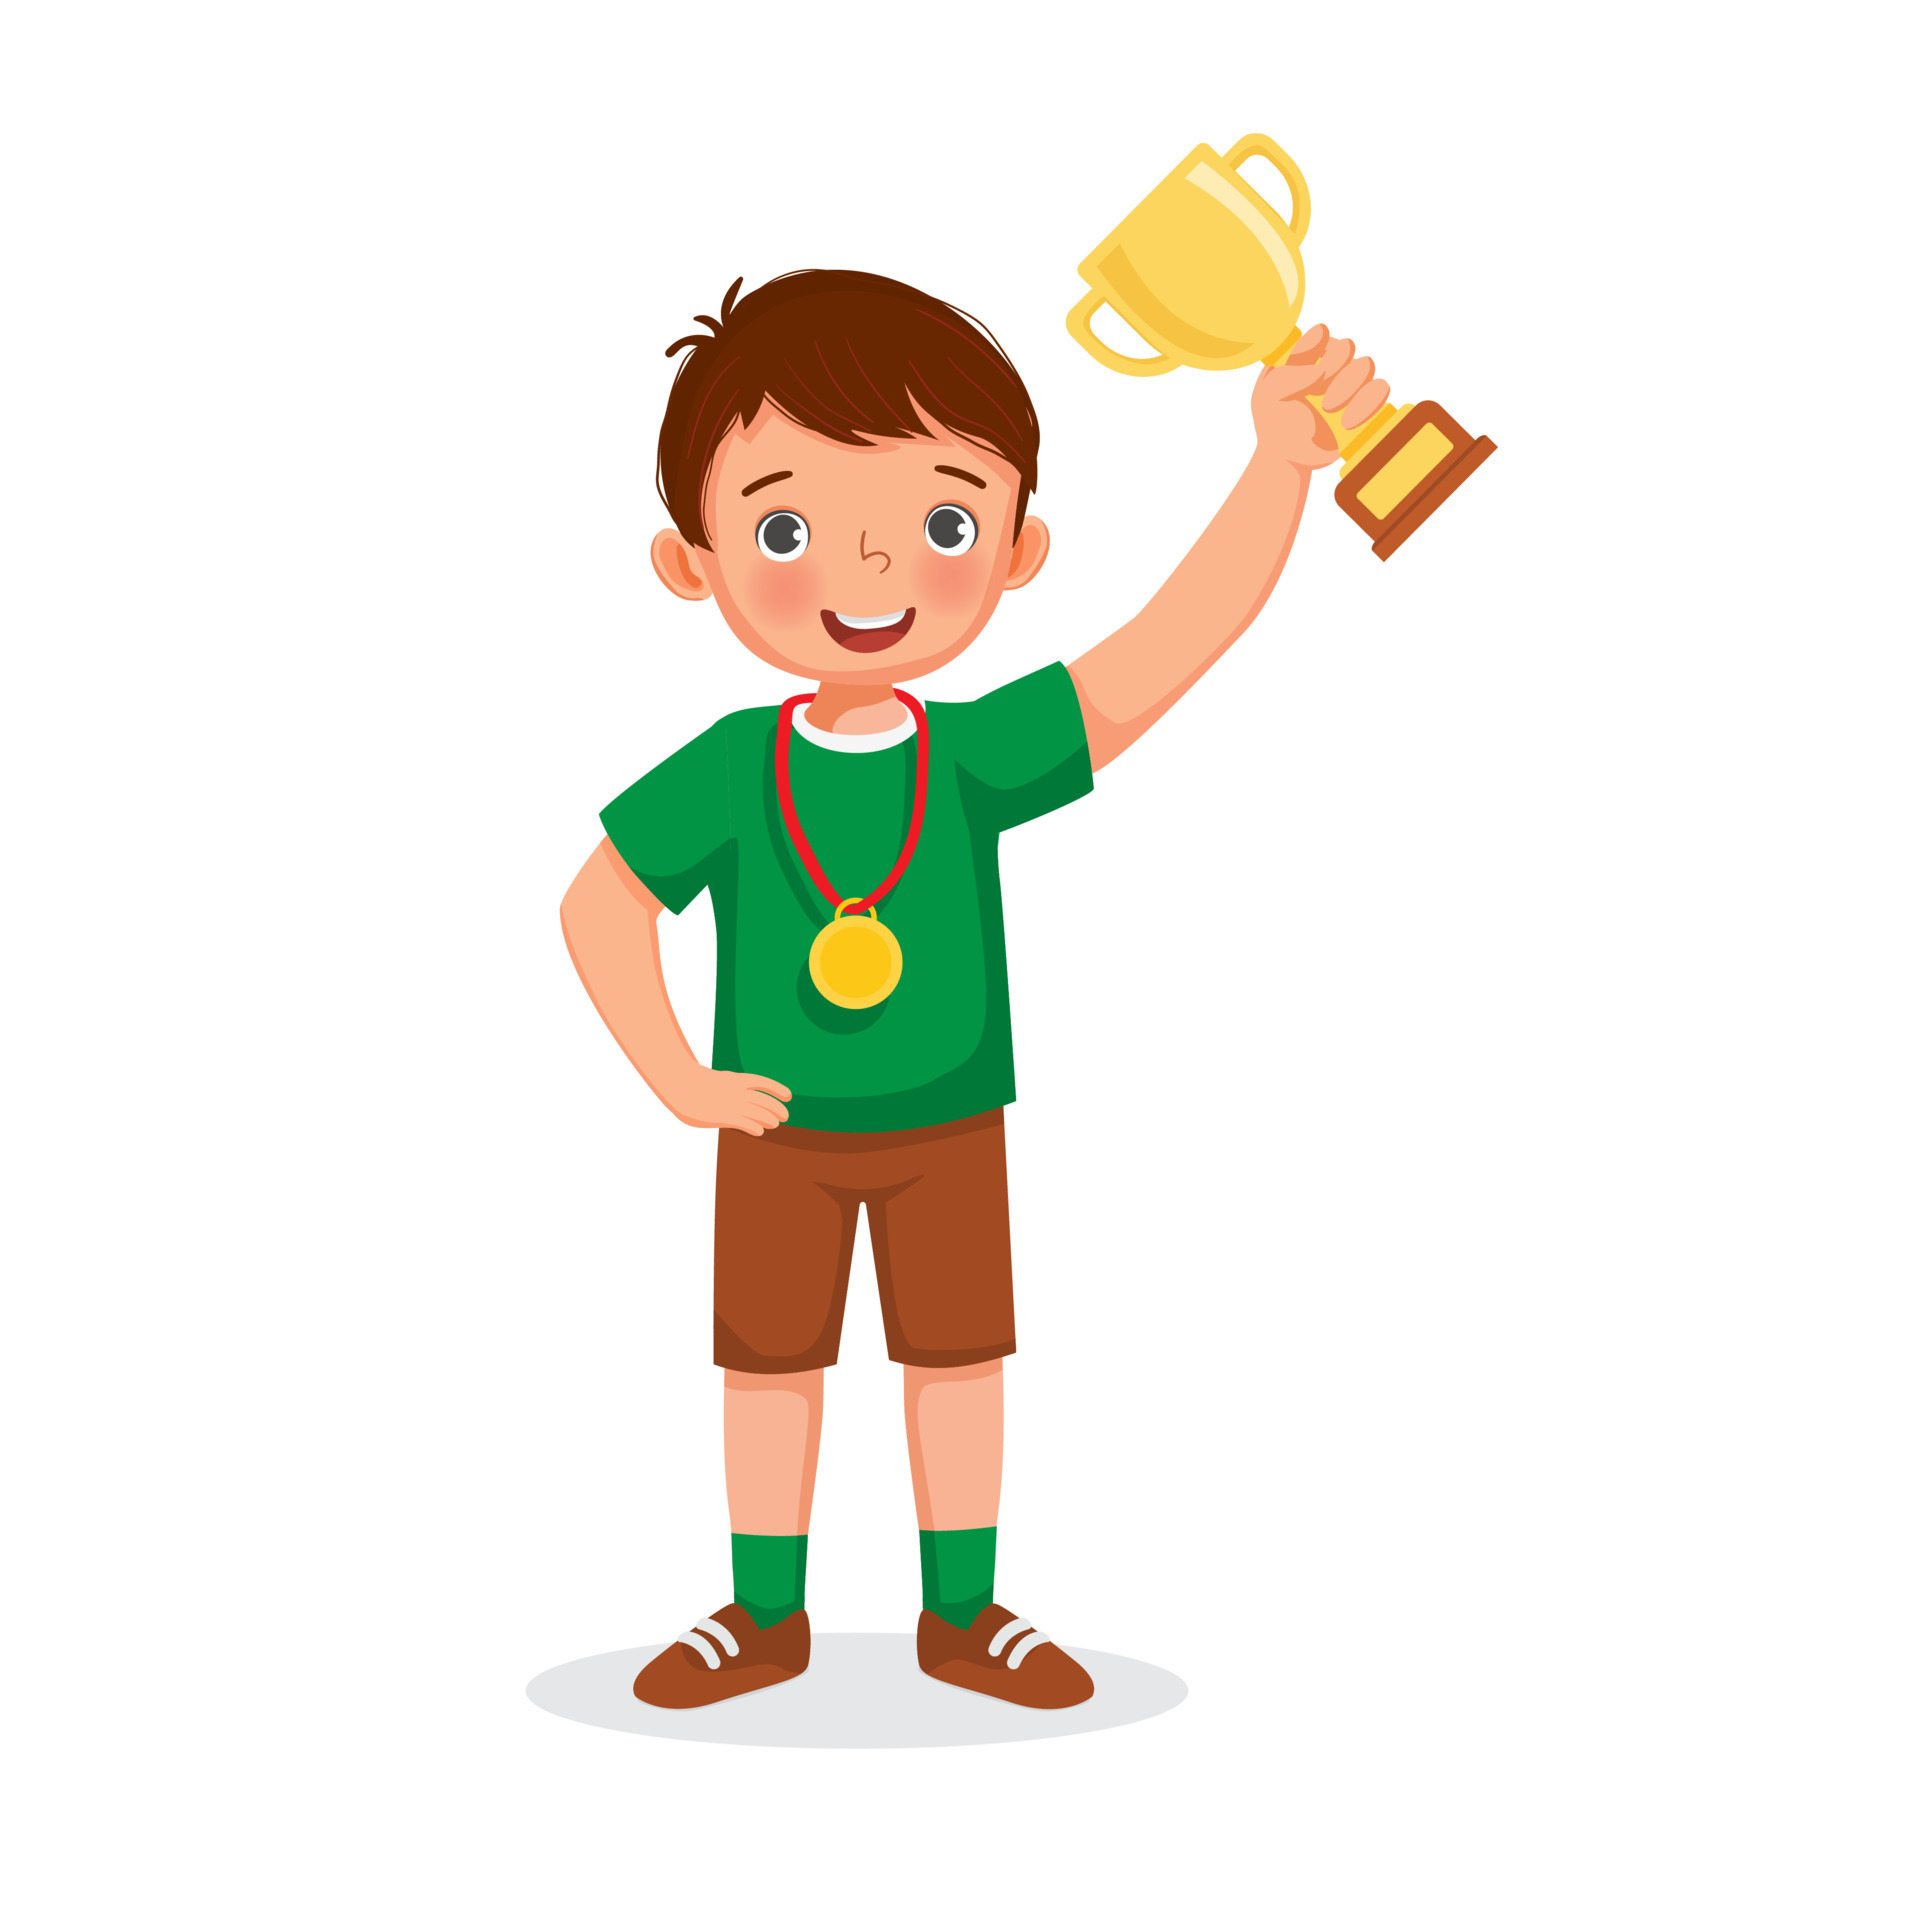 Cute little boy holding up a gold cup trophy and medal celebrating